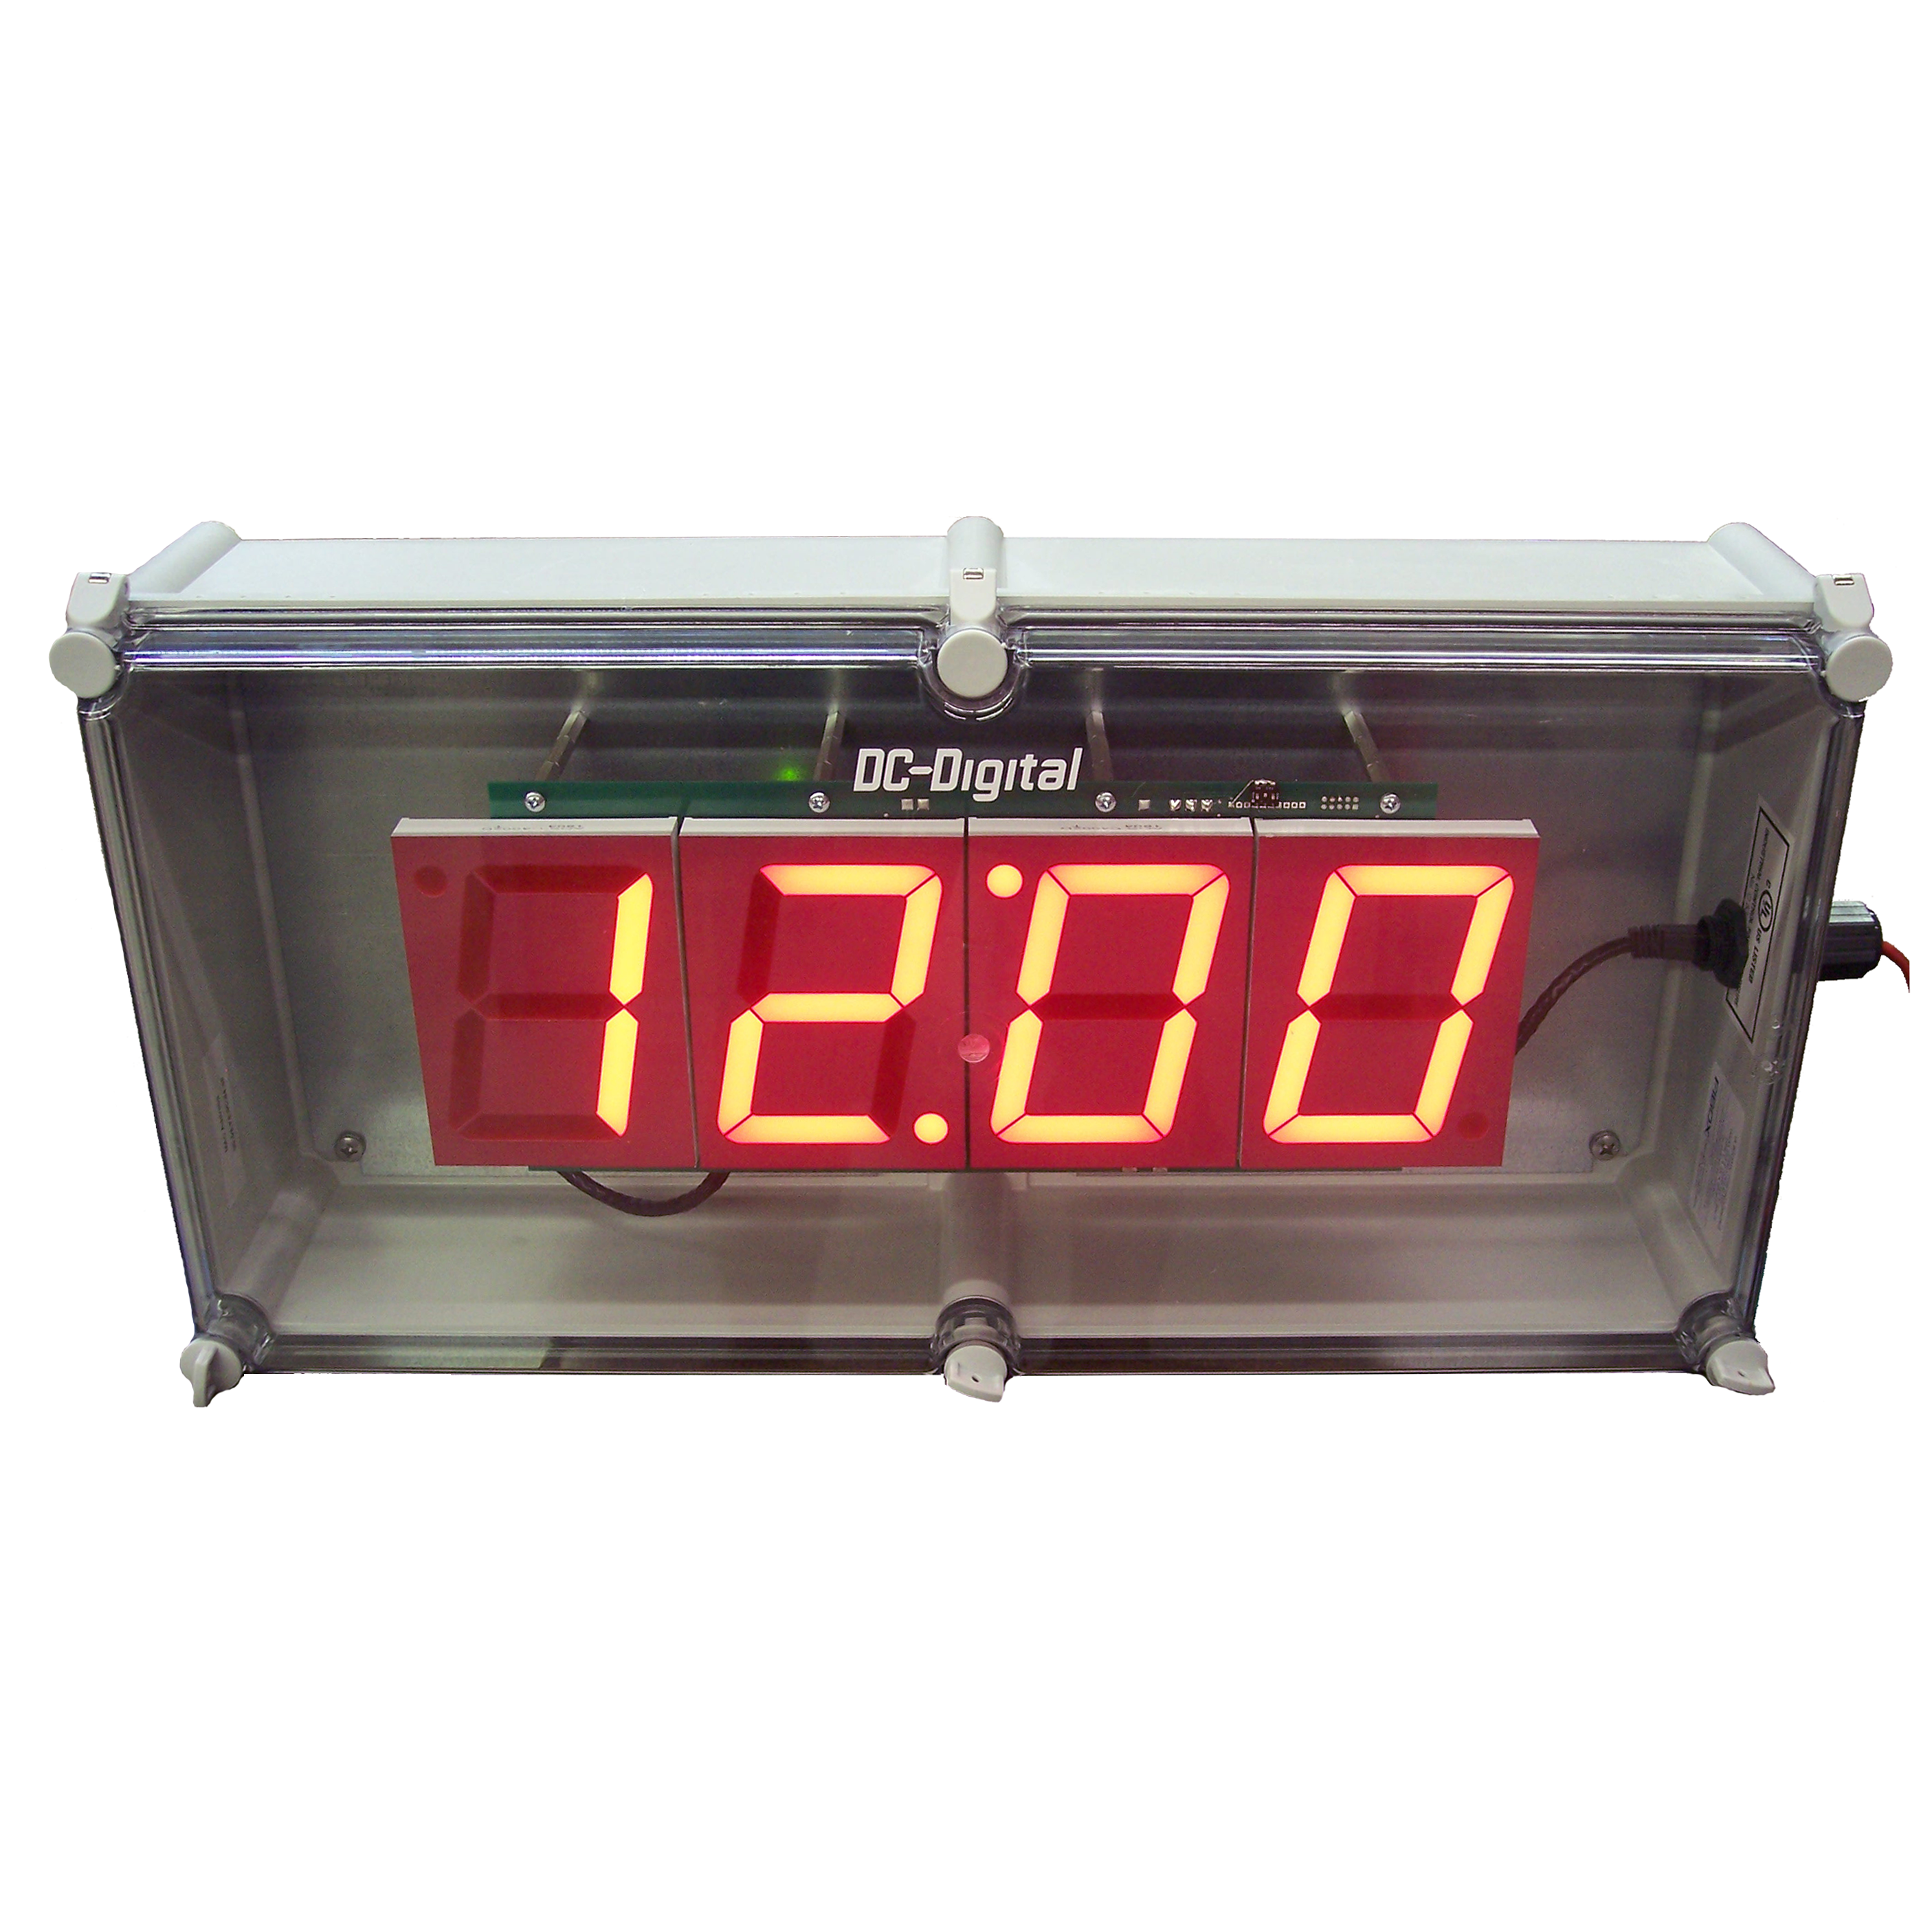 (DC-40N-POE-NEMA) 4.0 Inch LED, Network NTP Server Synchronized, Web Page Configurable, POE Powered, Atomic Digital Time of Day Clock in a NEMA 4X Enclosure